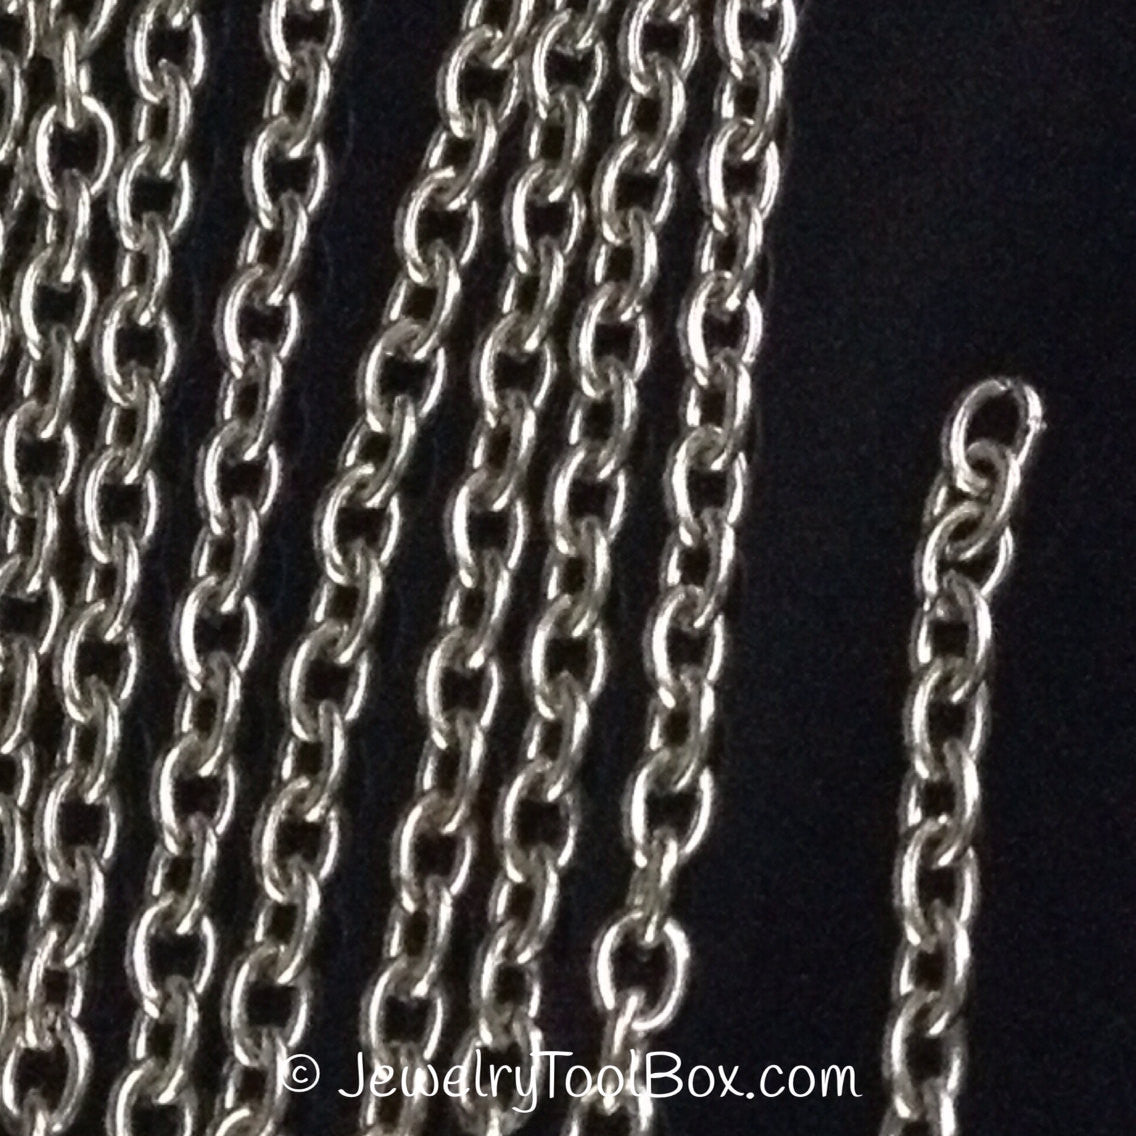 Stainless Steel Ball Chain - 50 Foot Spool - Metal Designz